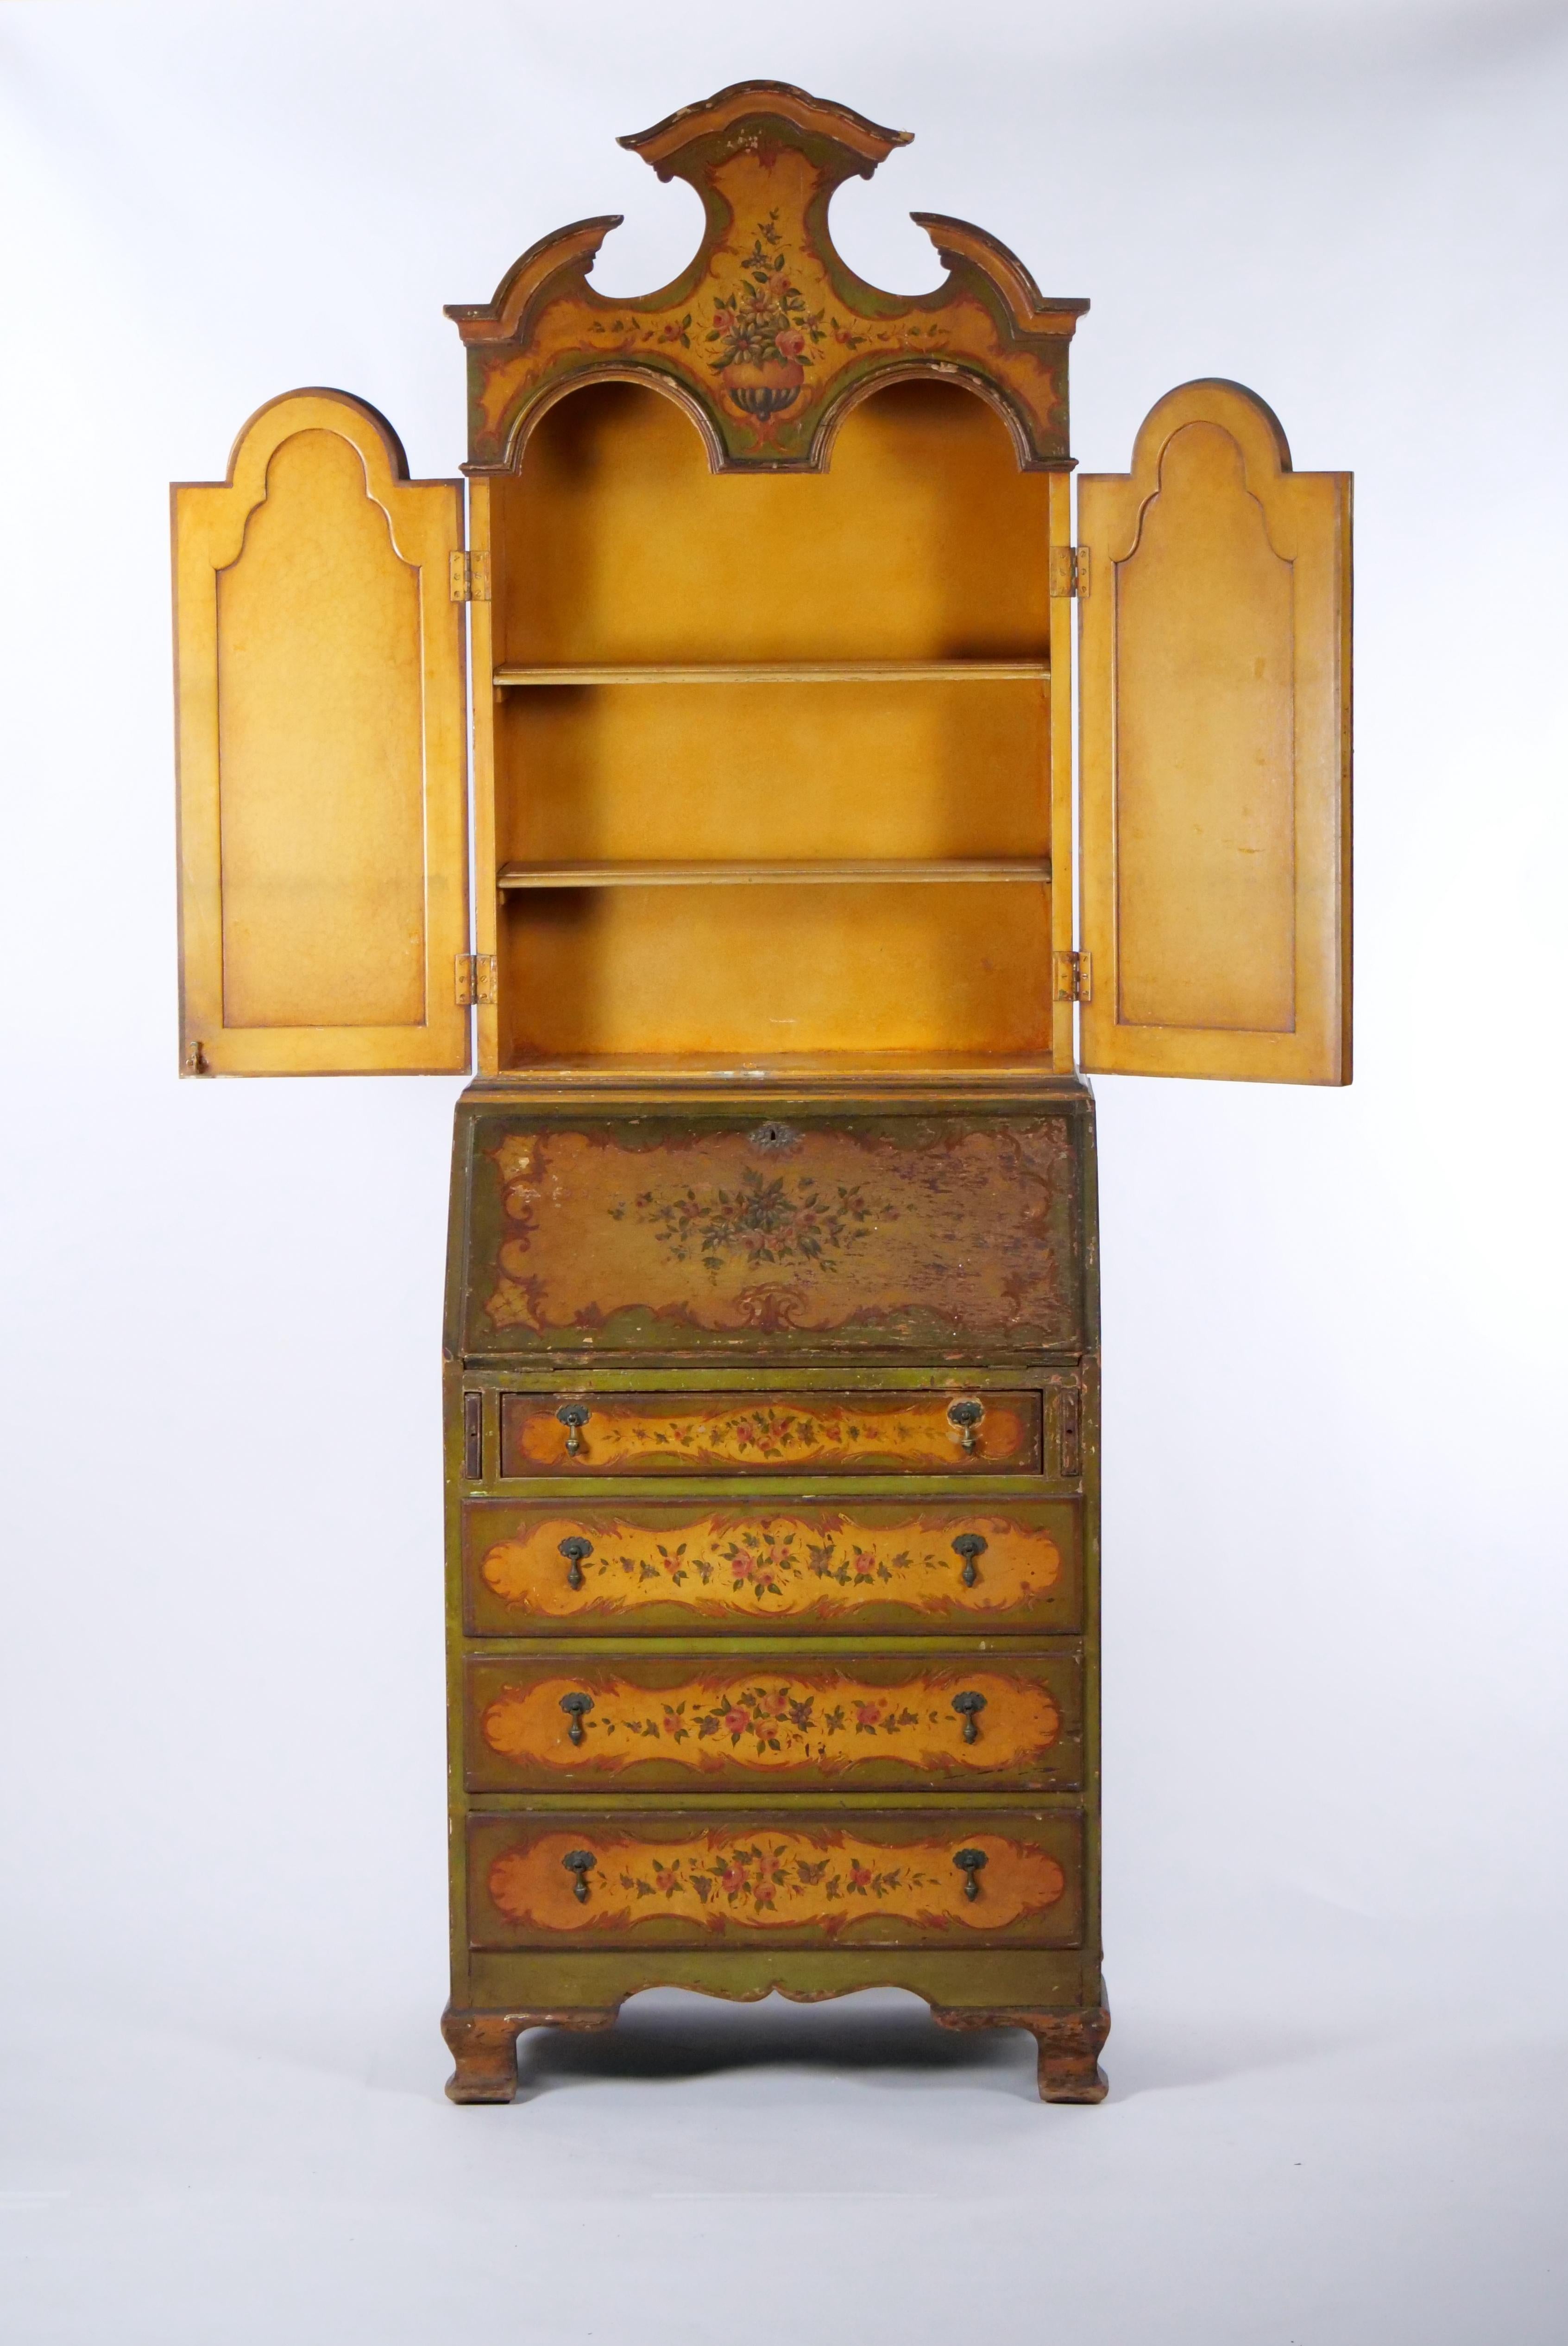 This is a Classic Venetian style Italian polychrome lacquered bookcase with hand painted floral decoration all over. This case piece is exquisitely hand painted with floral decoration and overall parcel gilt. The piece is very sturdy with lots of